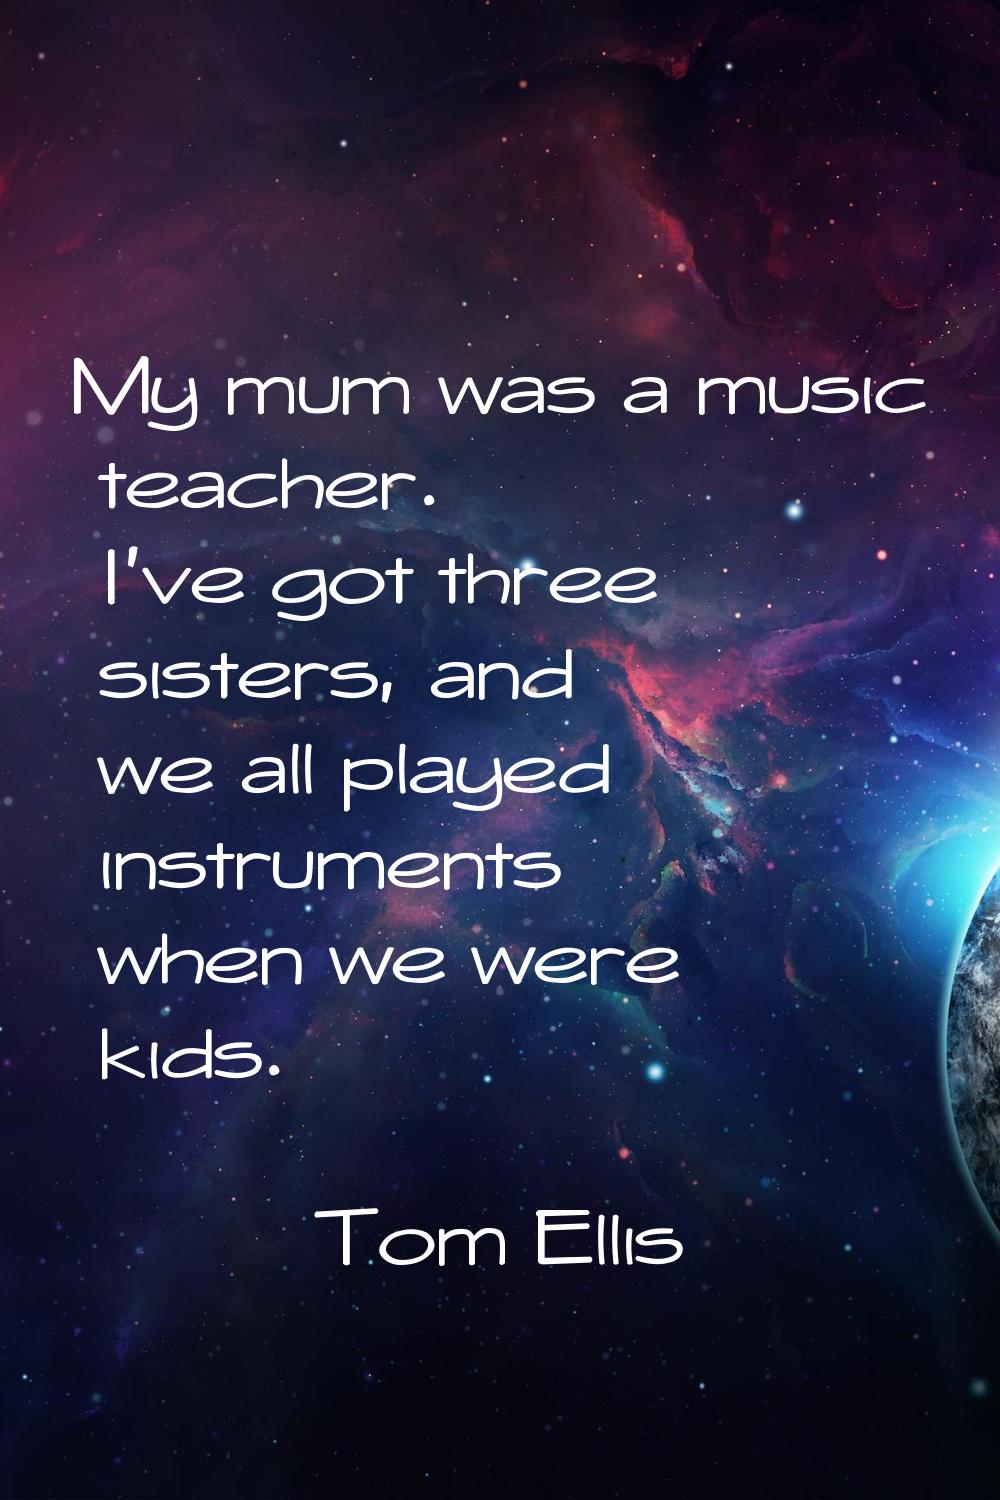 My mum was a music teacher. I've got three sisters, and we all played instruments when we were kids